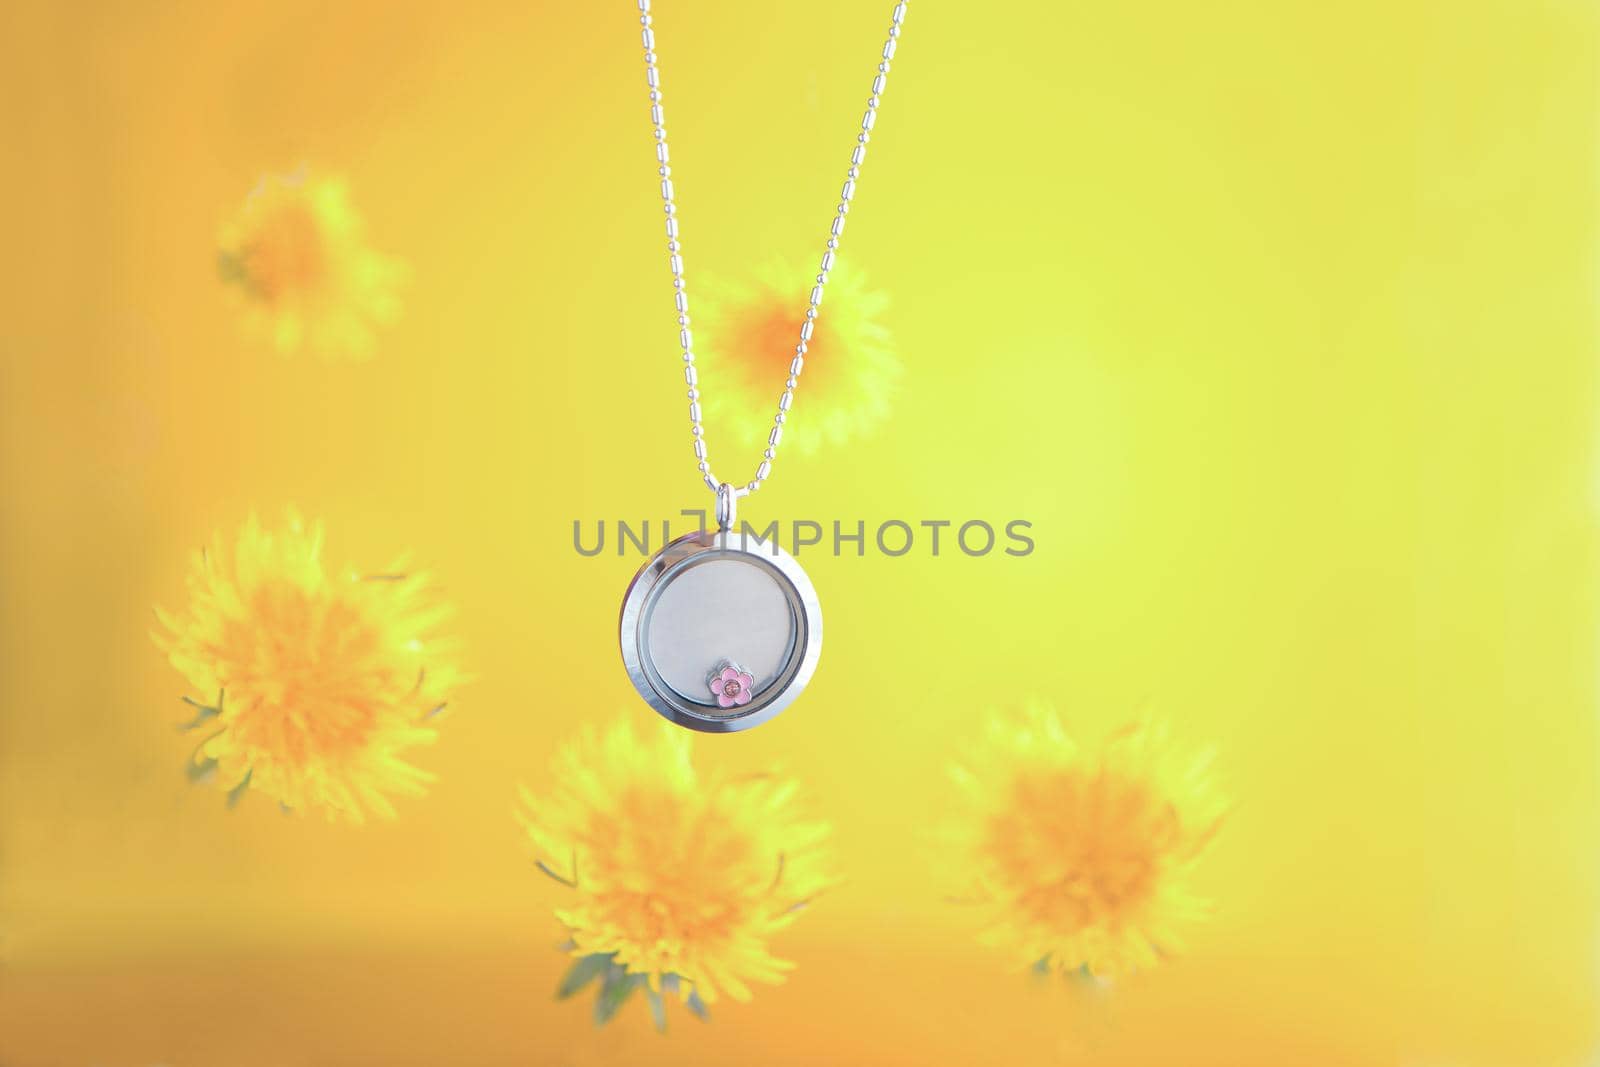 Silver necklace for her shining on yellow background with dandelions. Luxury silver jewelry chains with glass and crystals. Small Beautiful precious metal present for woman.